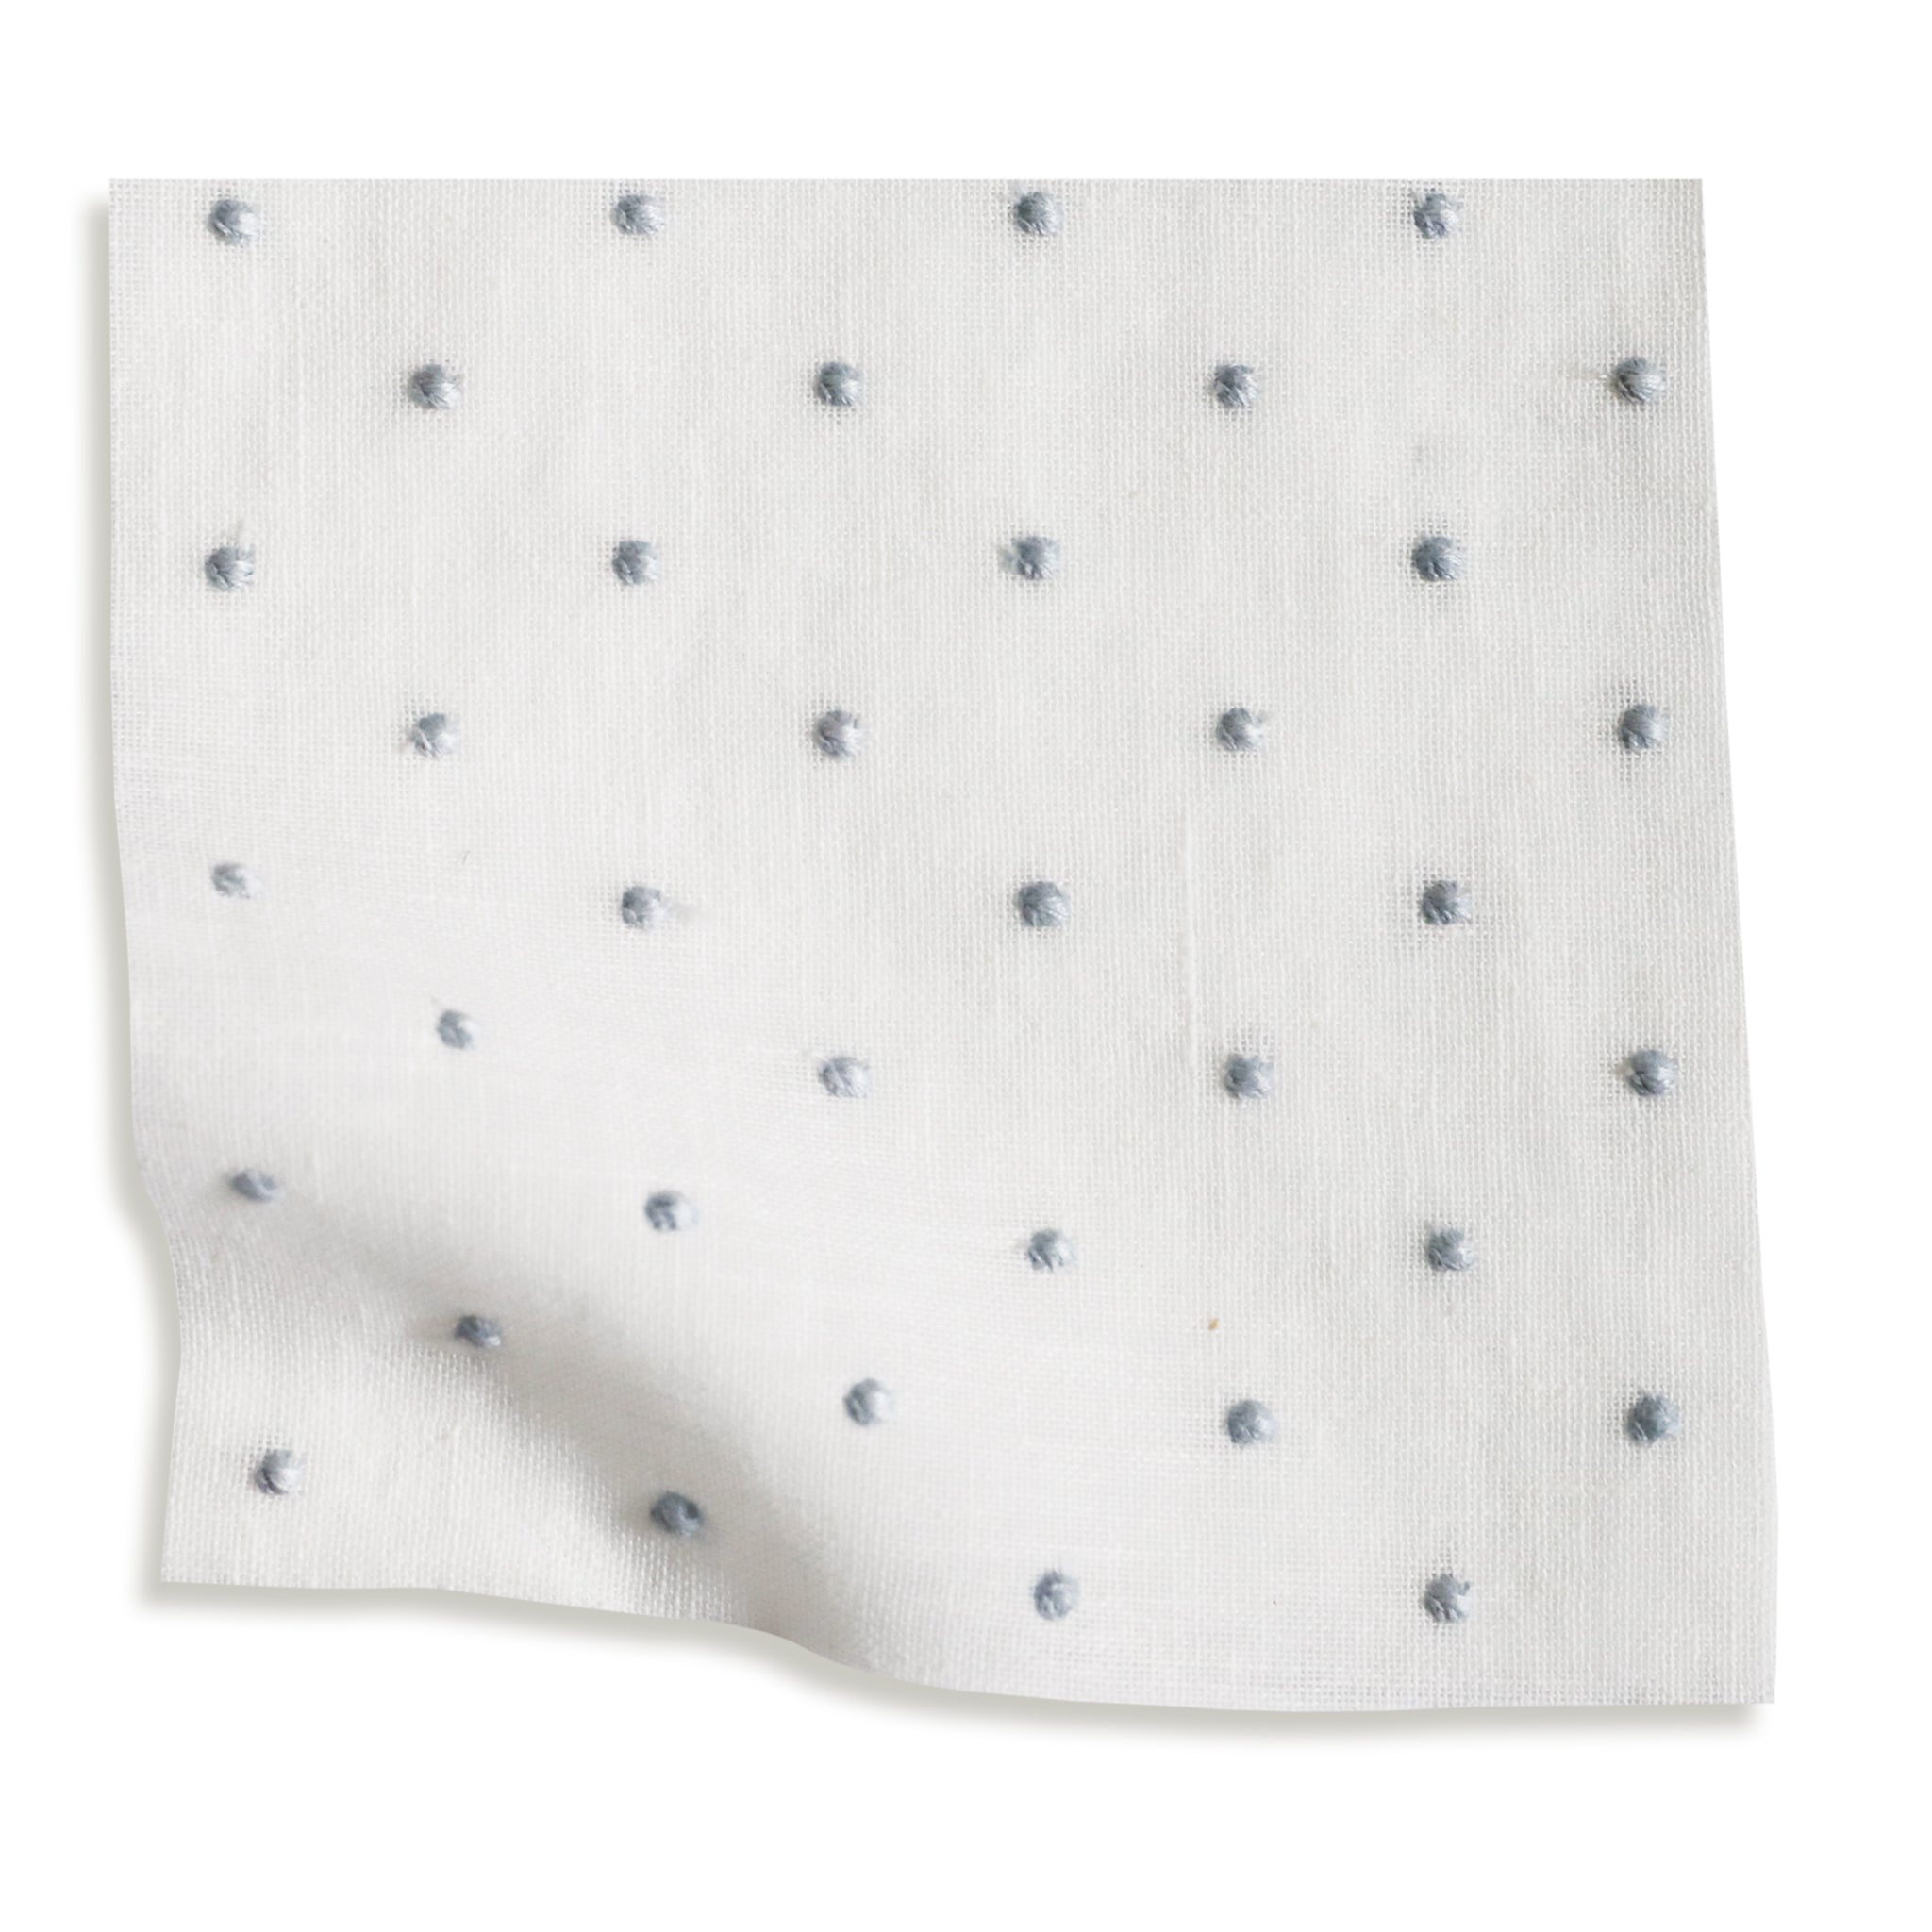 sheer white  fabric swatch with embroidered blue polka dots on it 